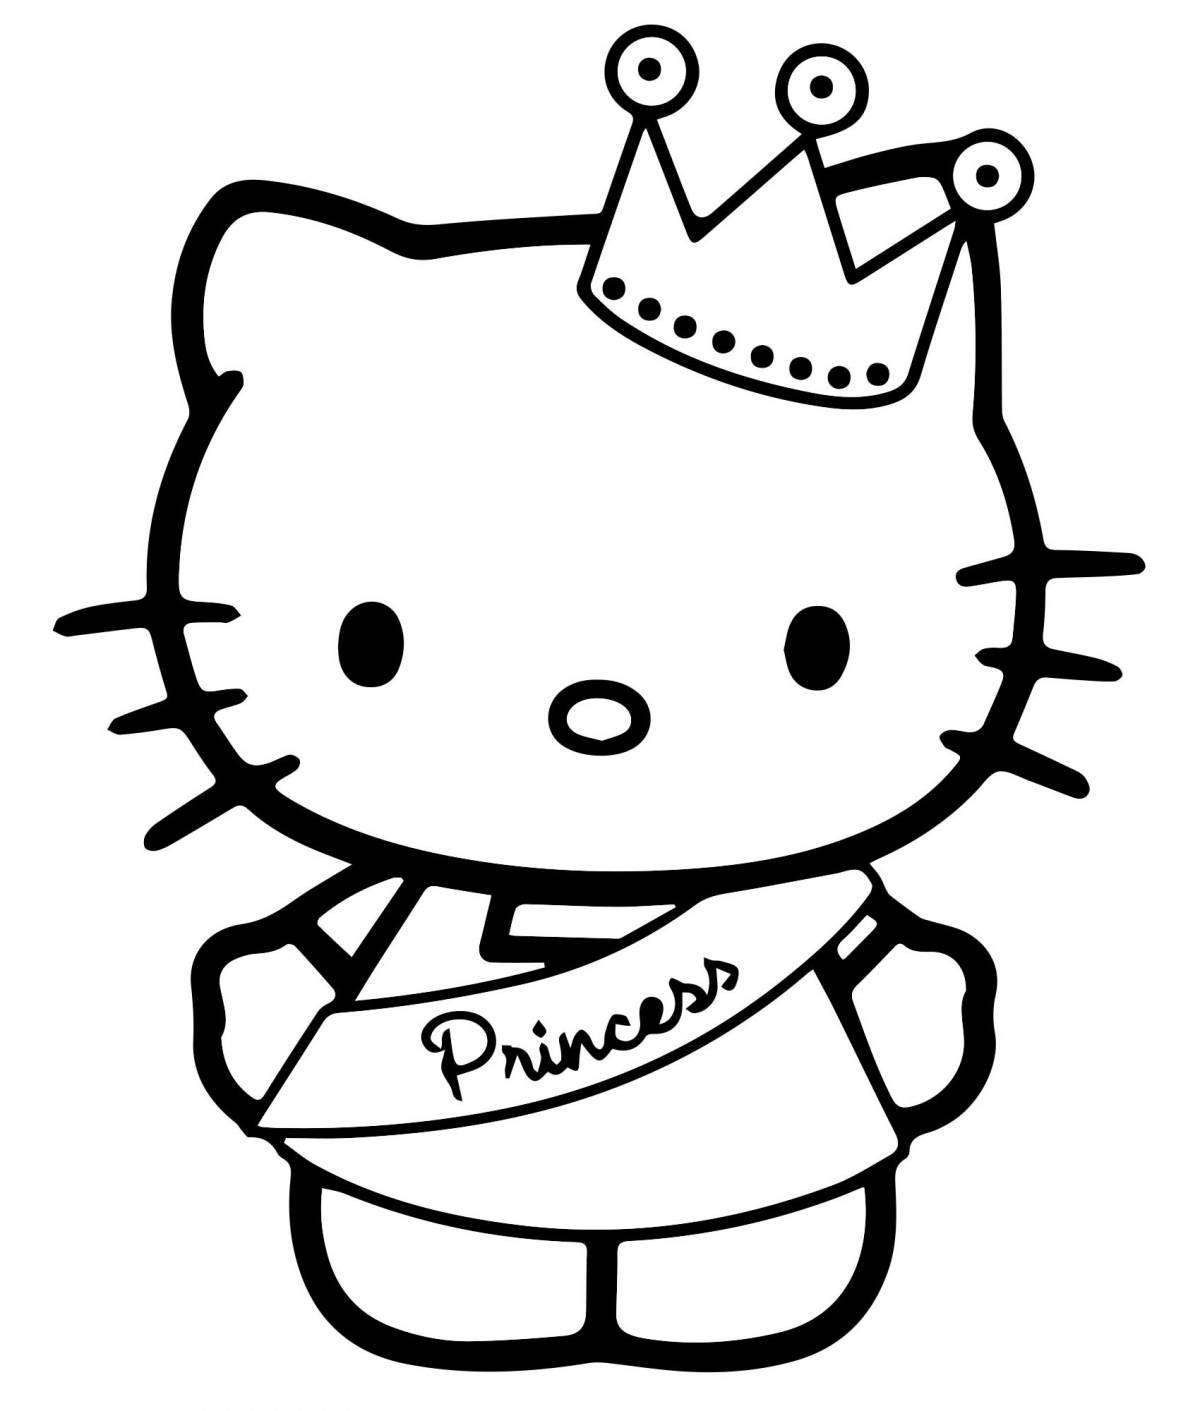 Cute hello kitty money coloring page